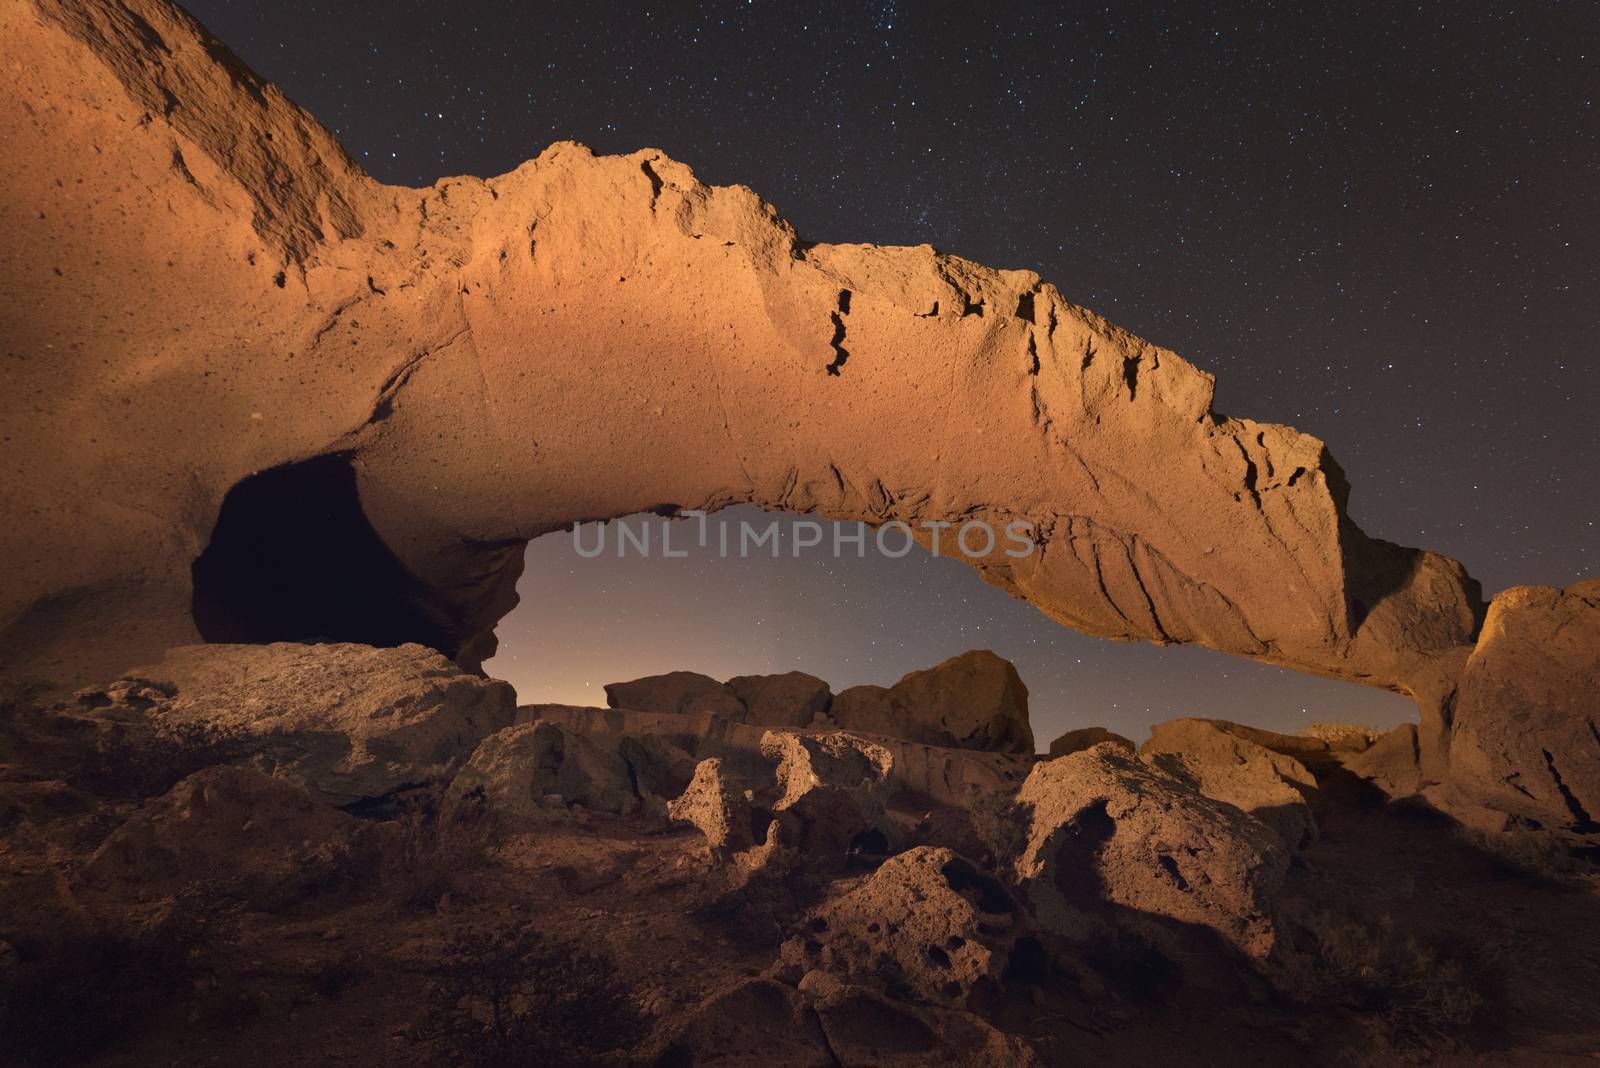 Starry night landscape of a volcanic Rock arch in Tenerife, Canary island, Spain.